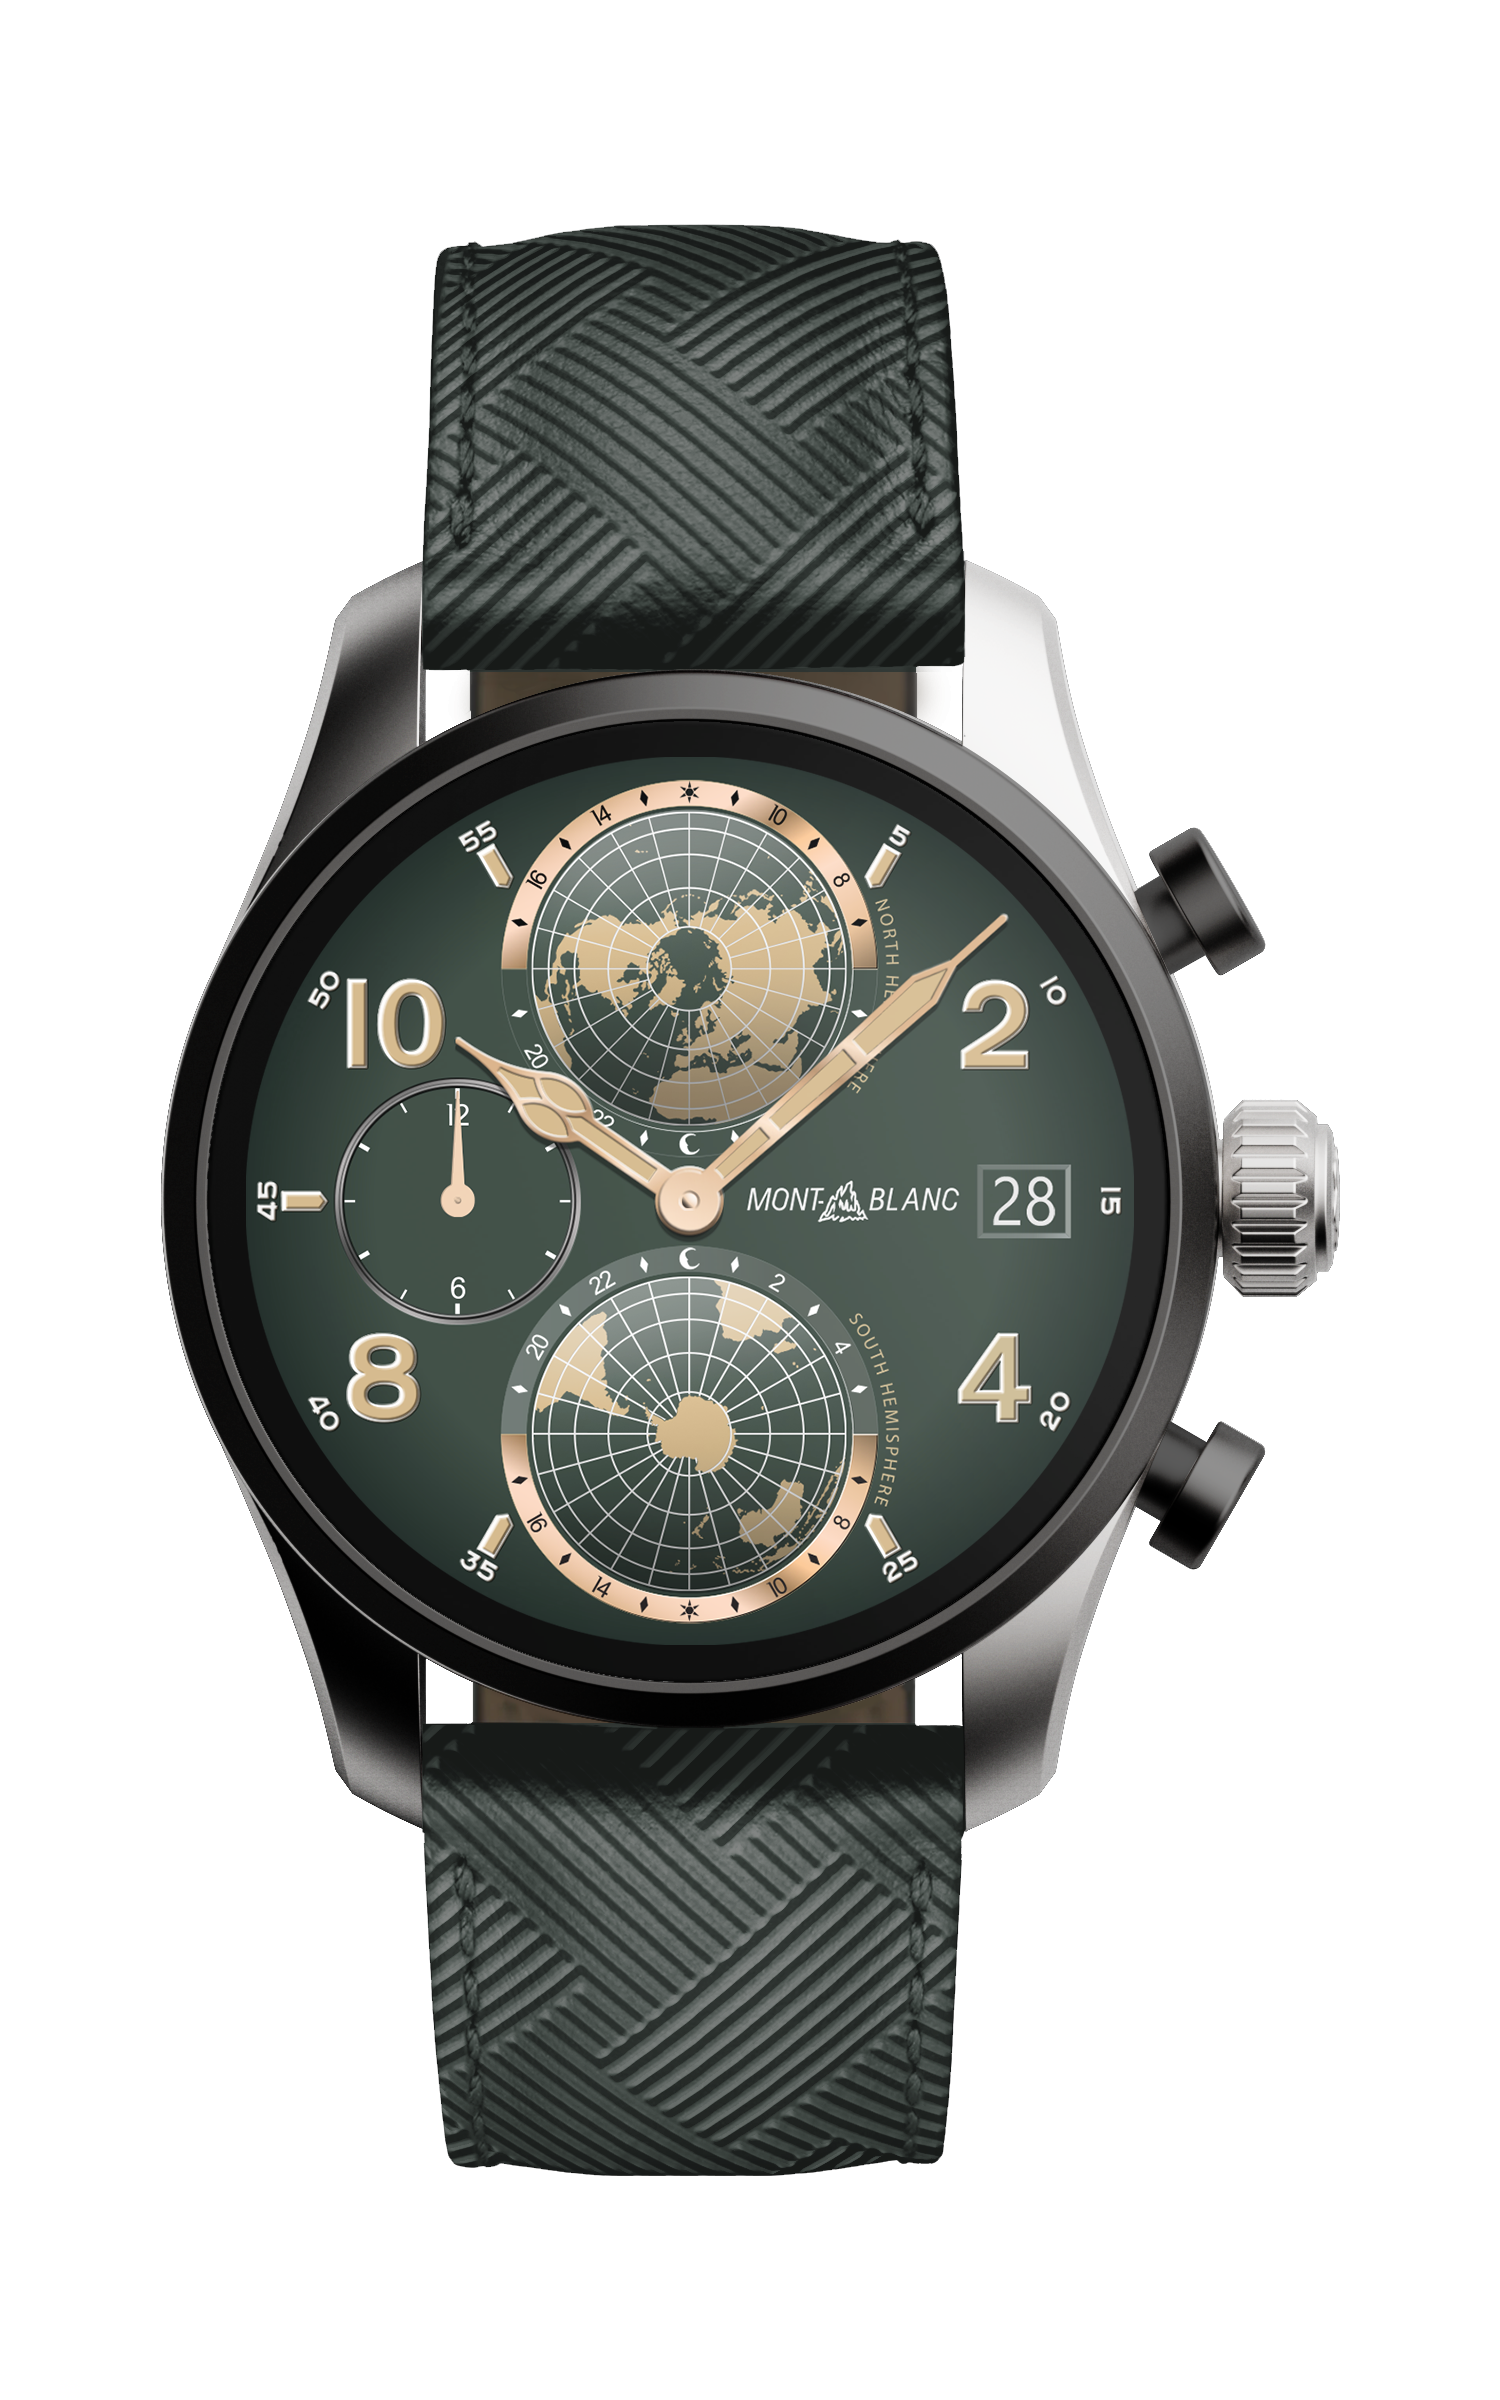 129269_129272 Summit 3 bicolor titanium green extreme leather strap_2282054.png